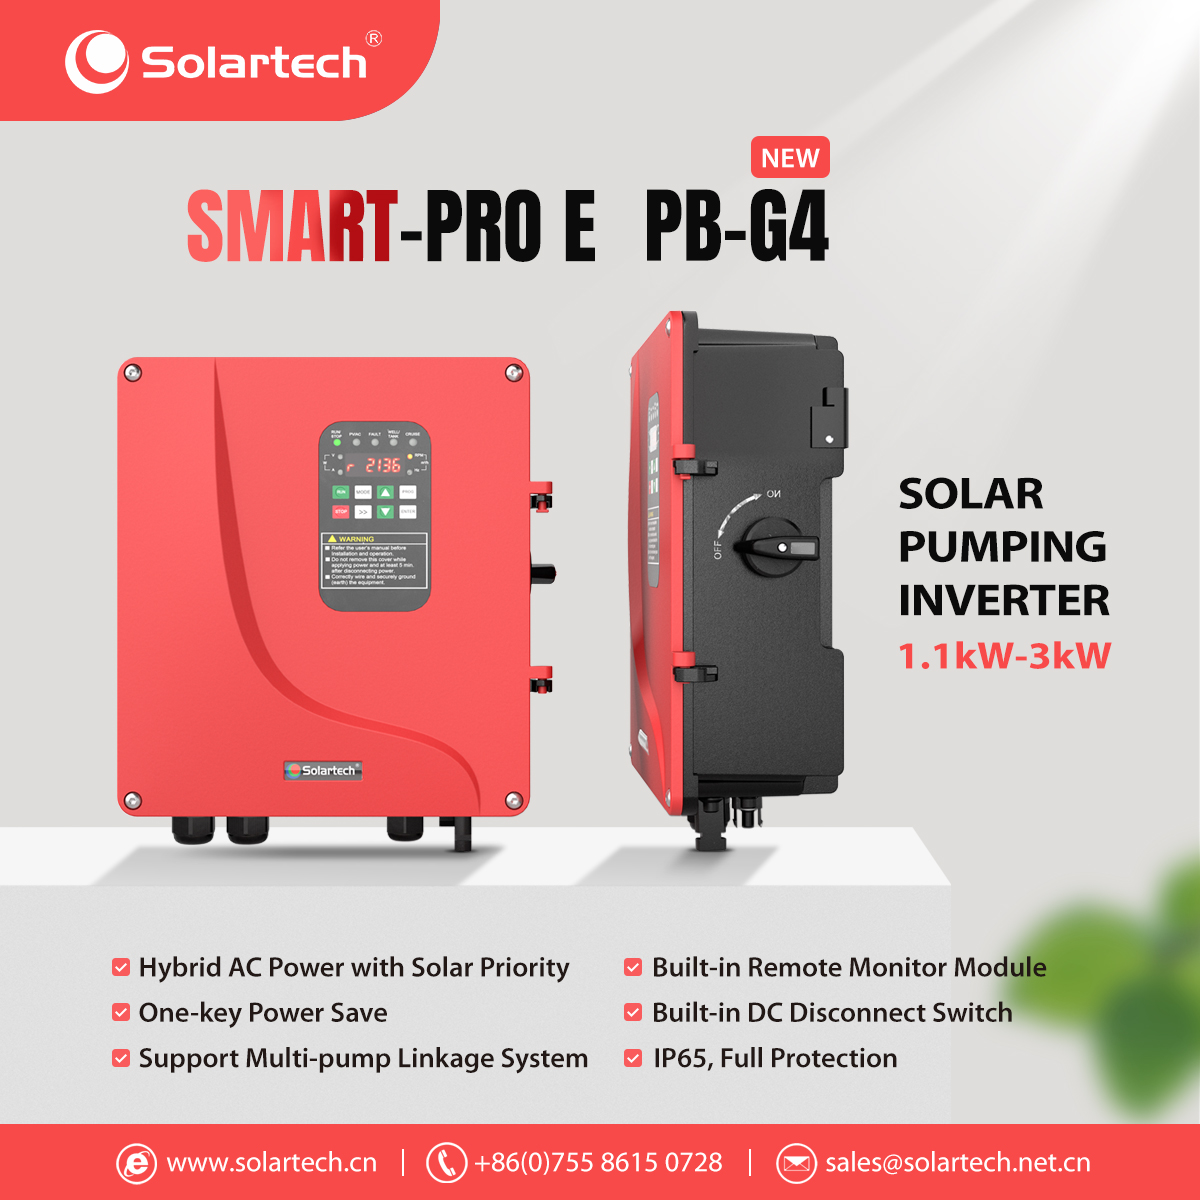 A top level integrated and smart pro solar pumping inverter launched by Solartech.
#solarpumpcontroller #solarinverter #pumpcontroller #solarpumpinverter #solarirrigation #offgridsolar #solarenergy #sustainablesolution #greenagriculture